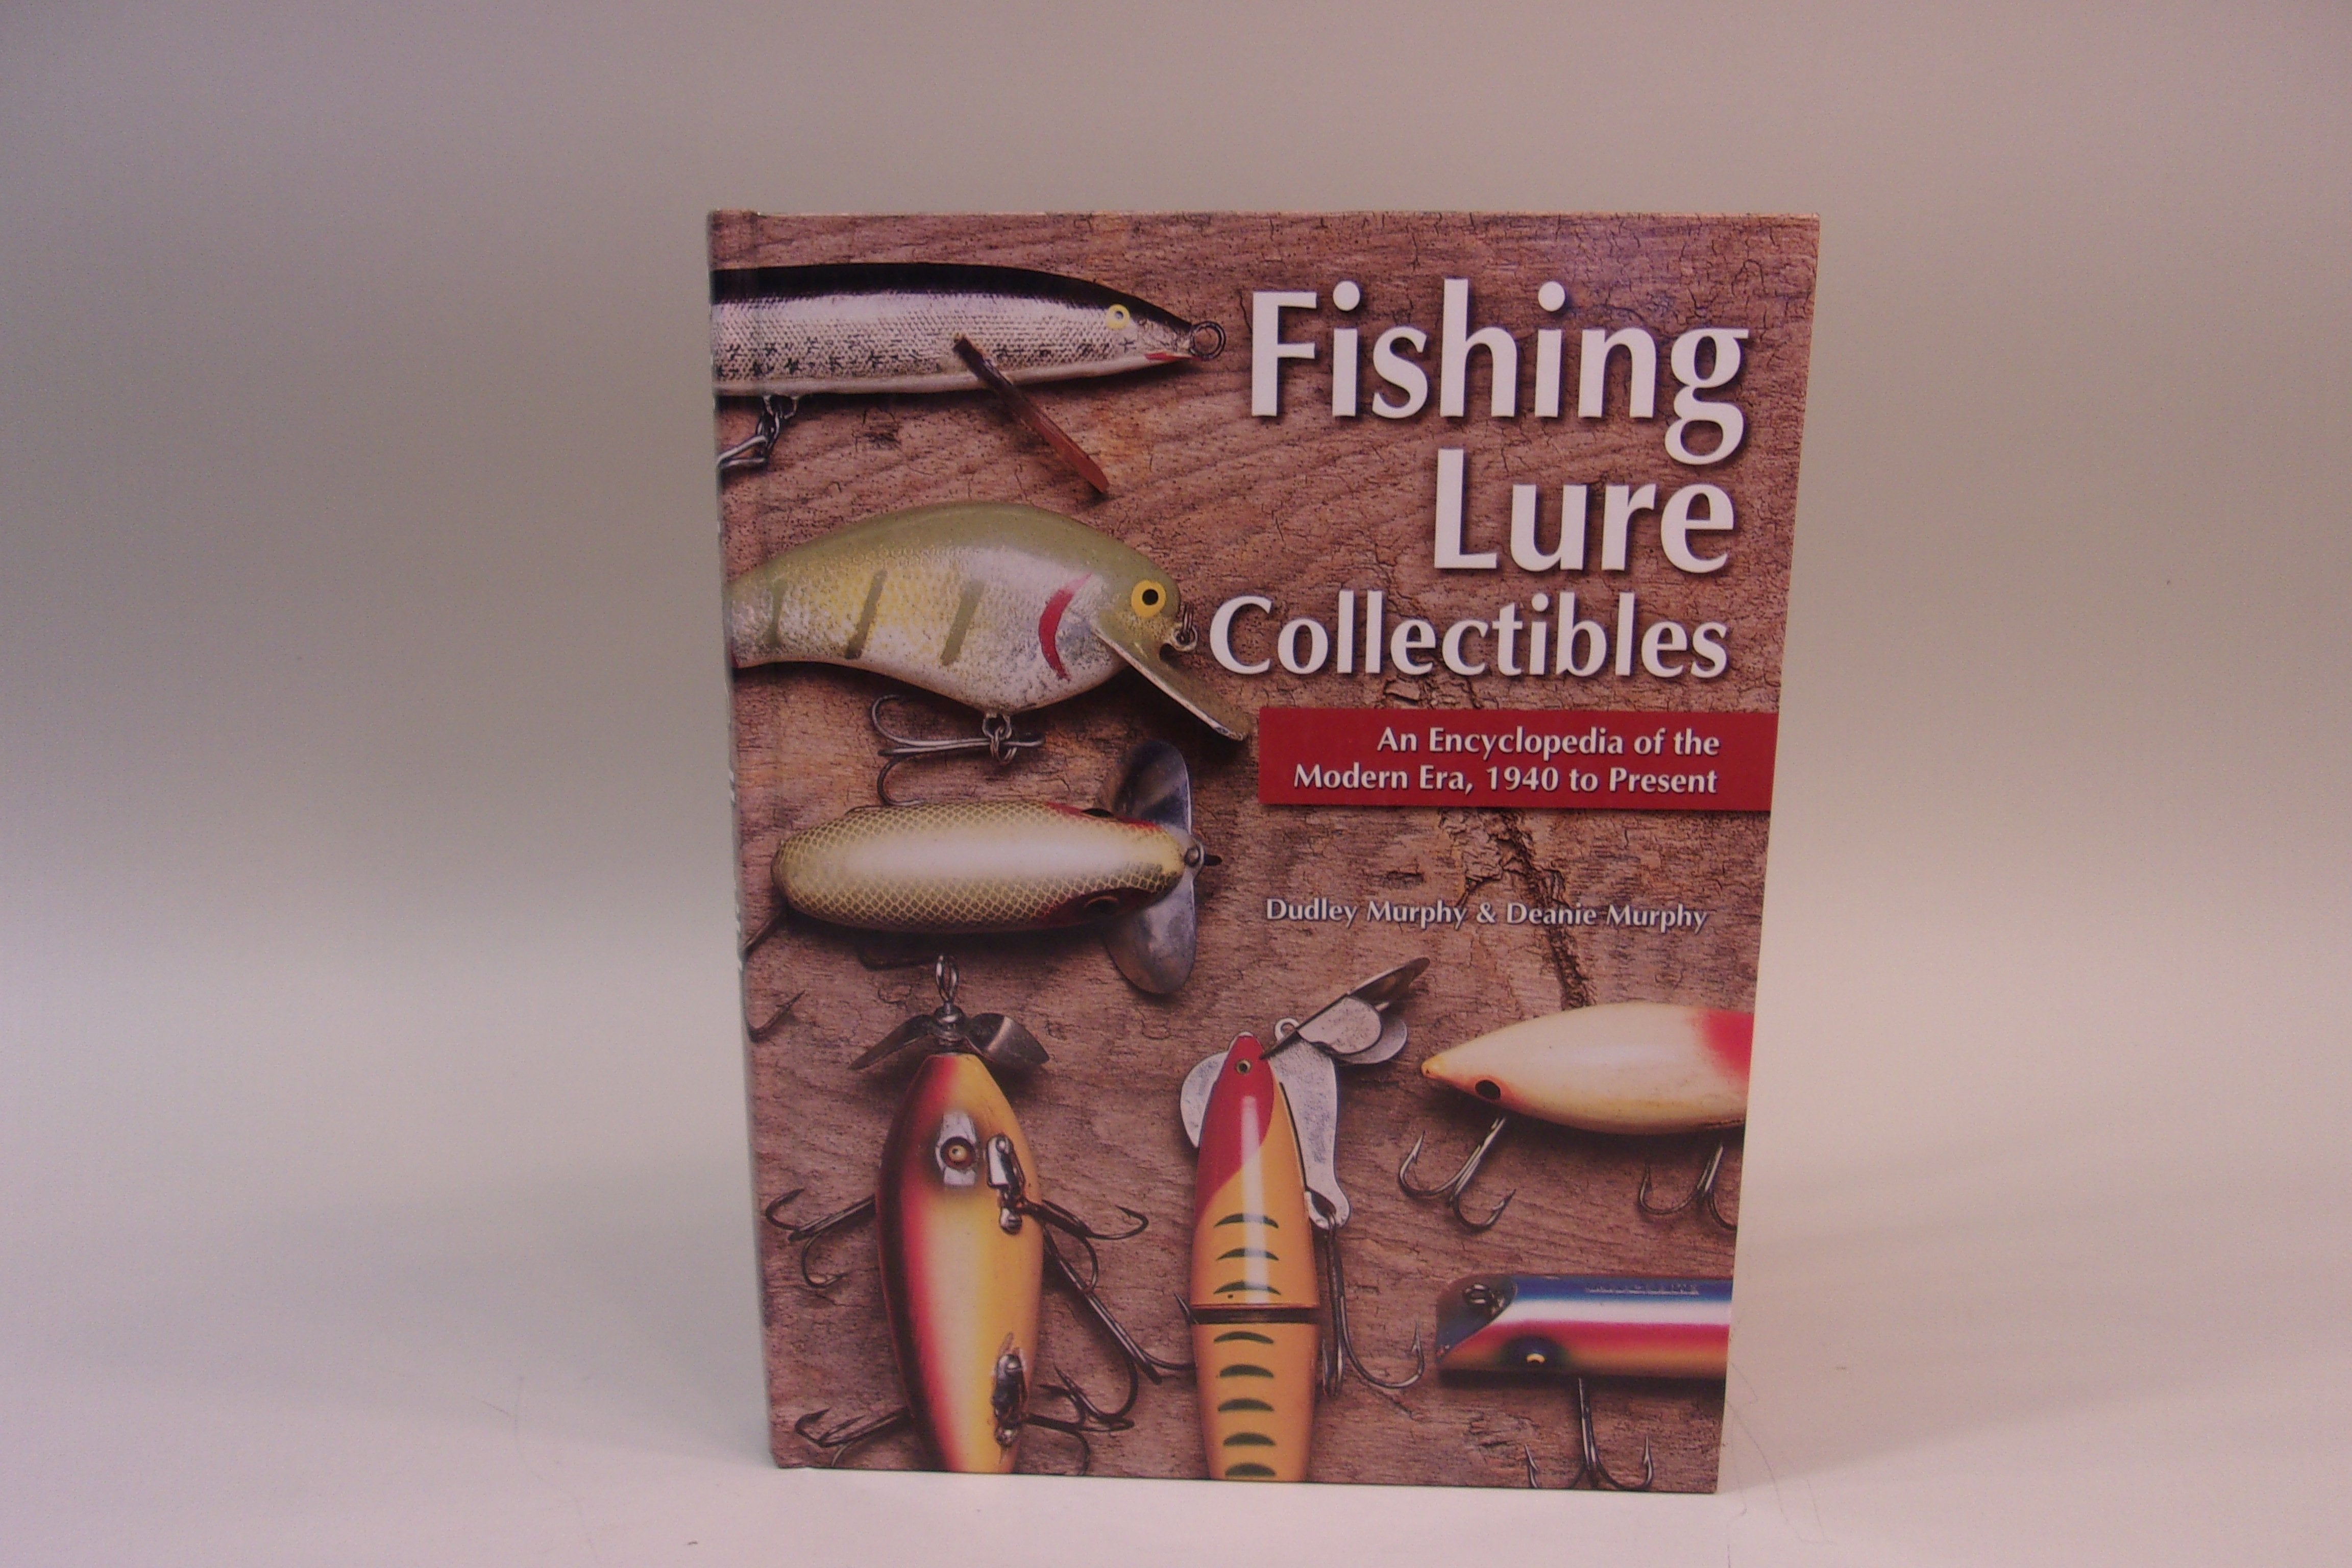 Fishing Lure Collectibles, Vol. 2, Second Edition: Murphy, Dudley